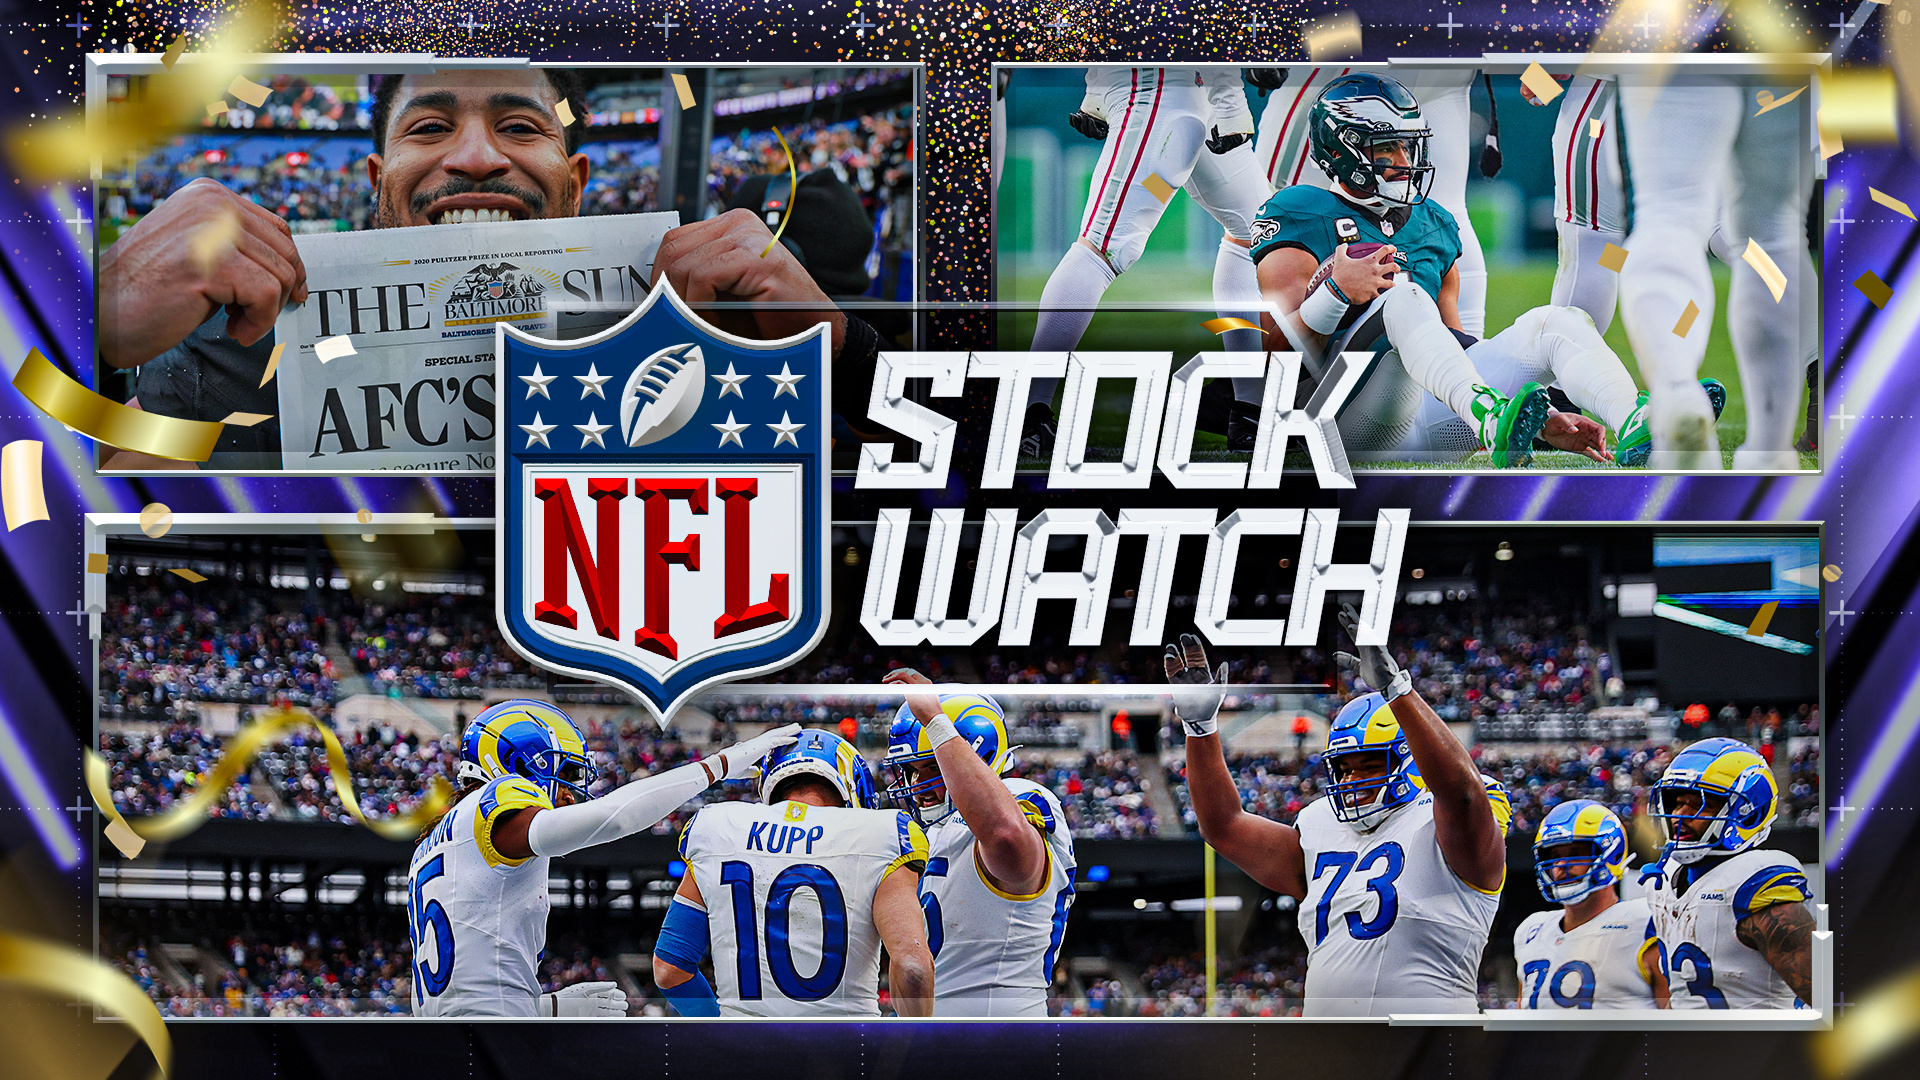 NFL Stock Watch: Ravens clearly league's top team; Rams look like playoff threat